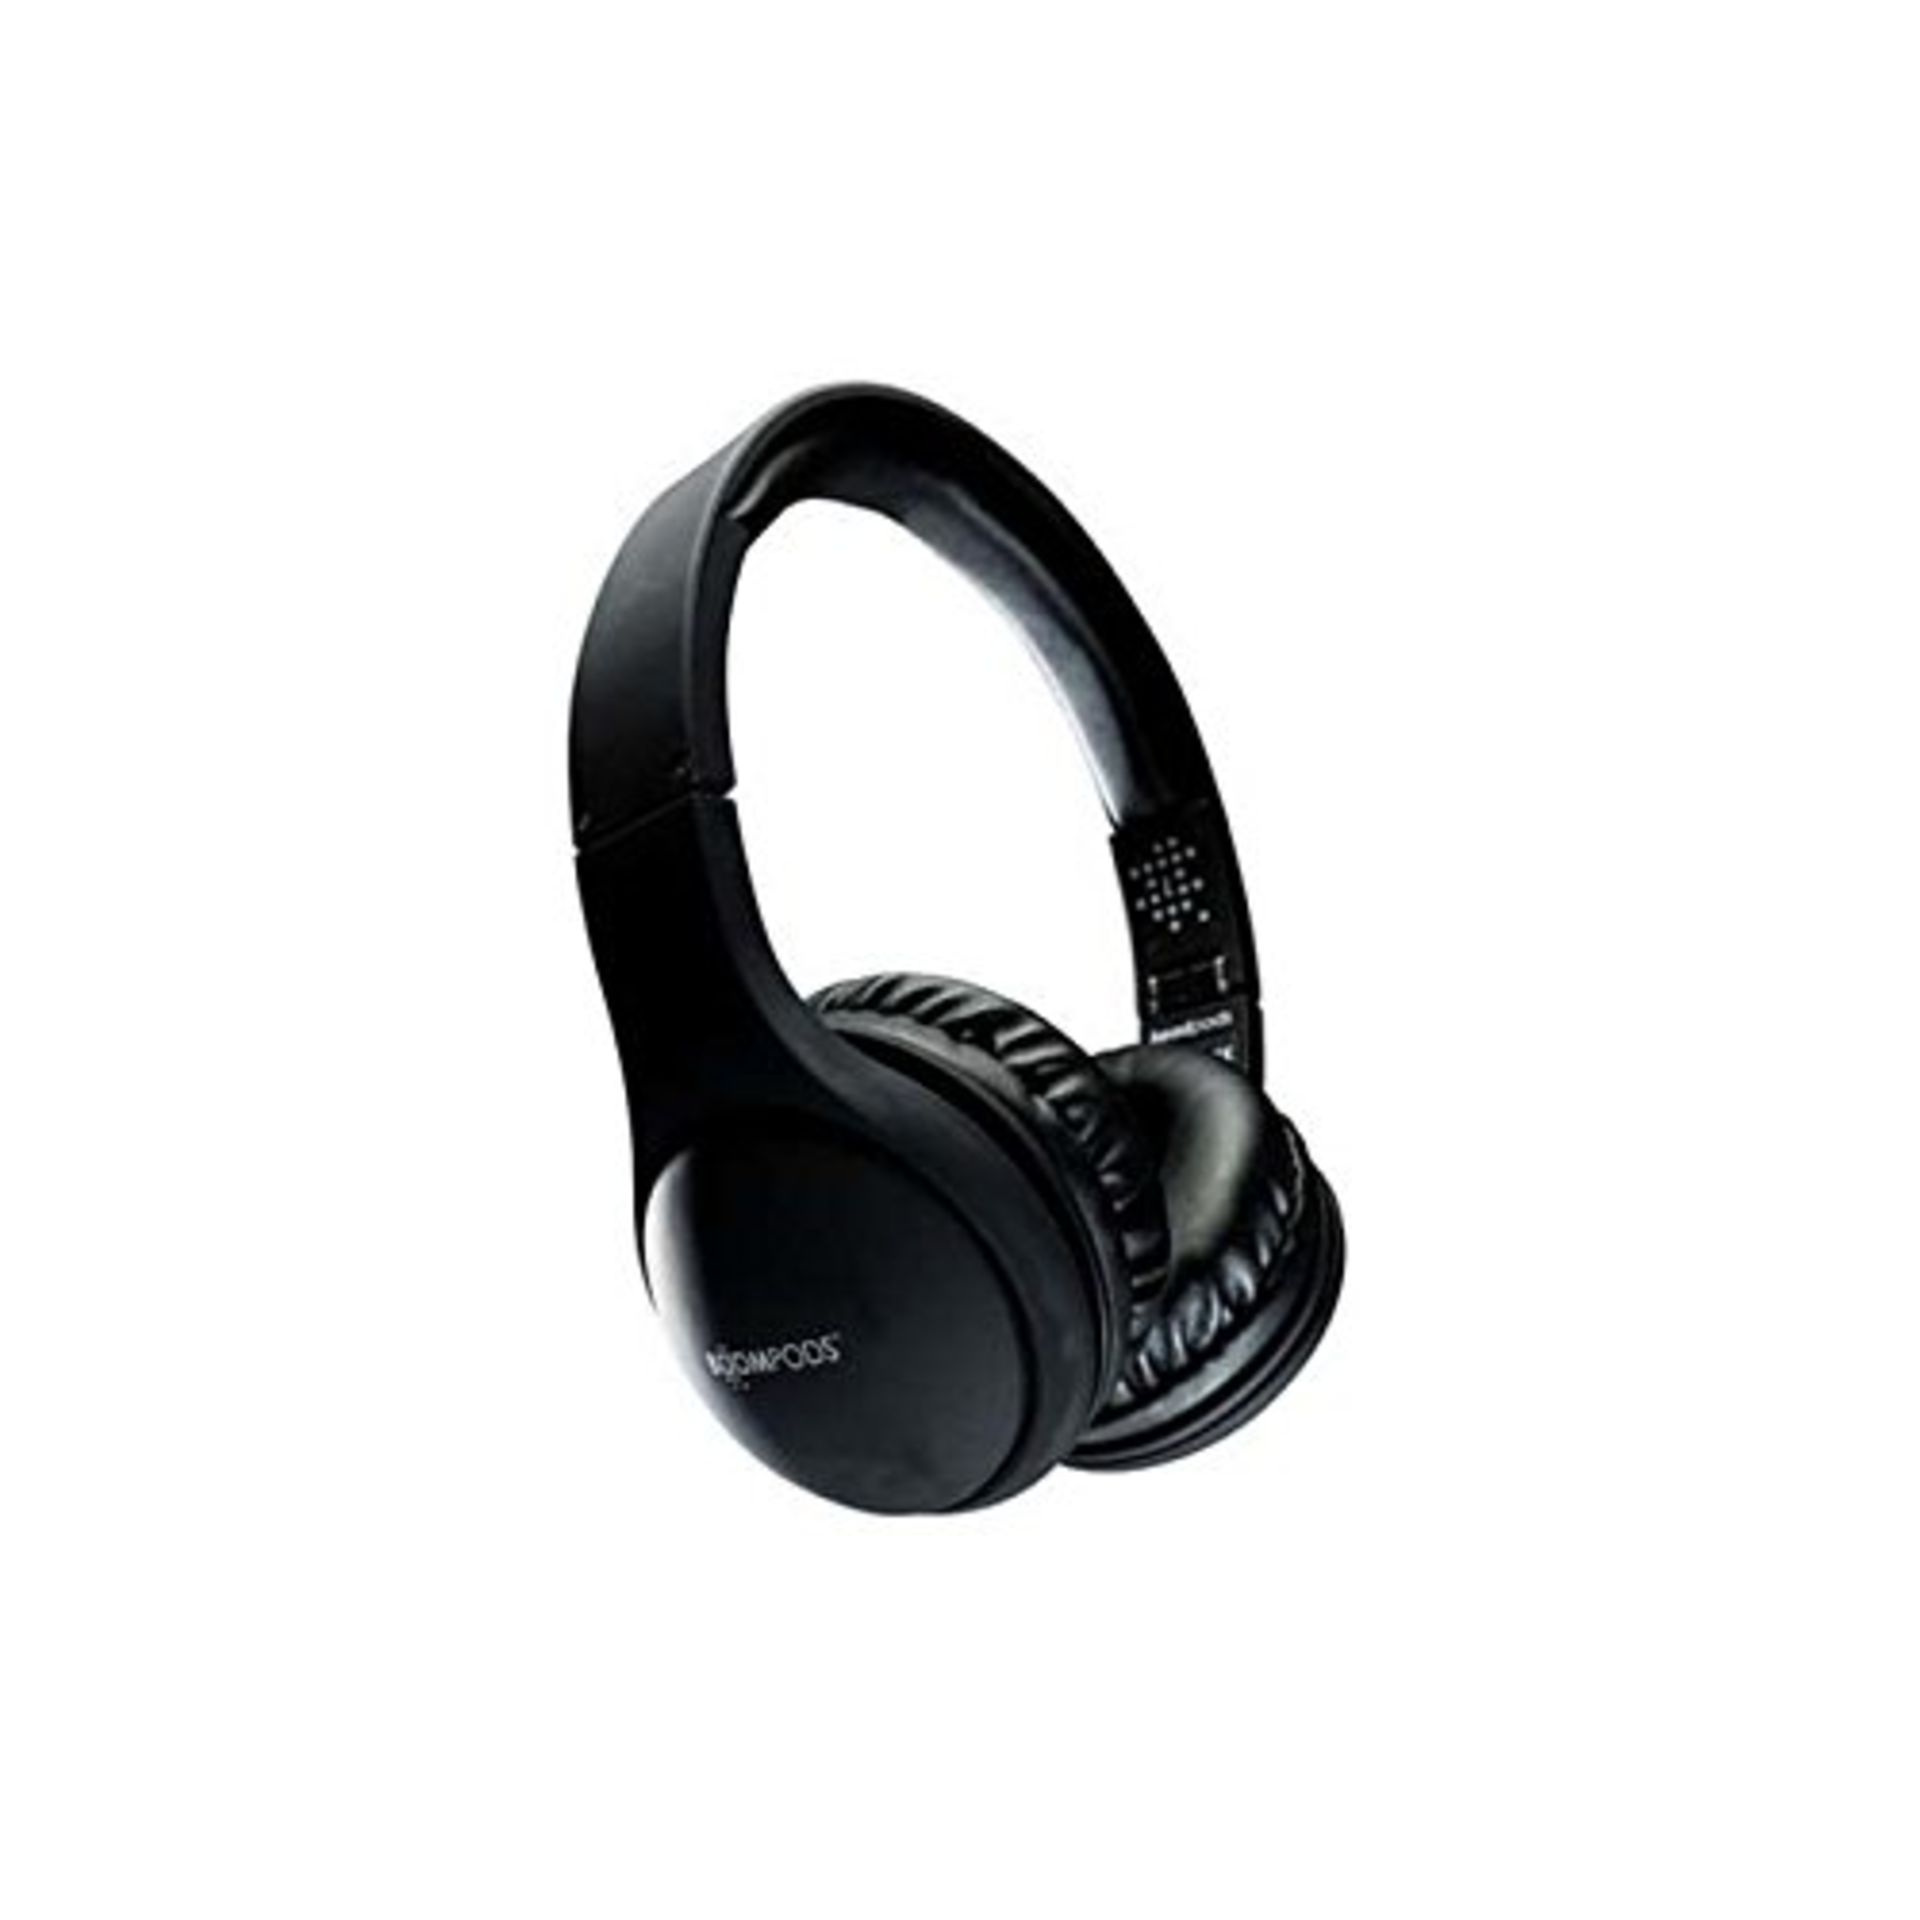 V *TRADE QTY* Brand New Boom Pods Headpods Foldable Soft Touch Headphones With Remote & Mic And